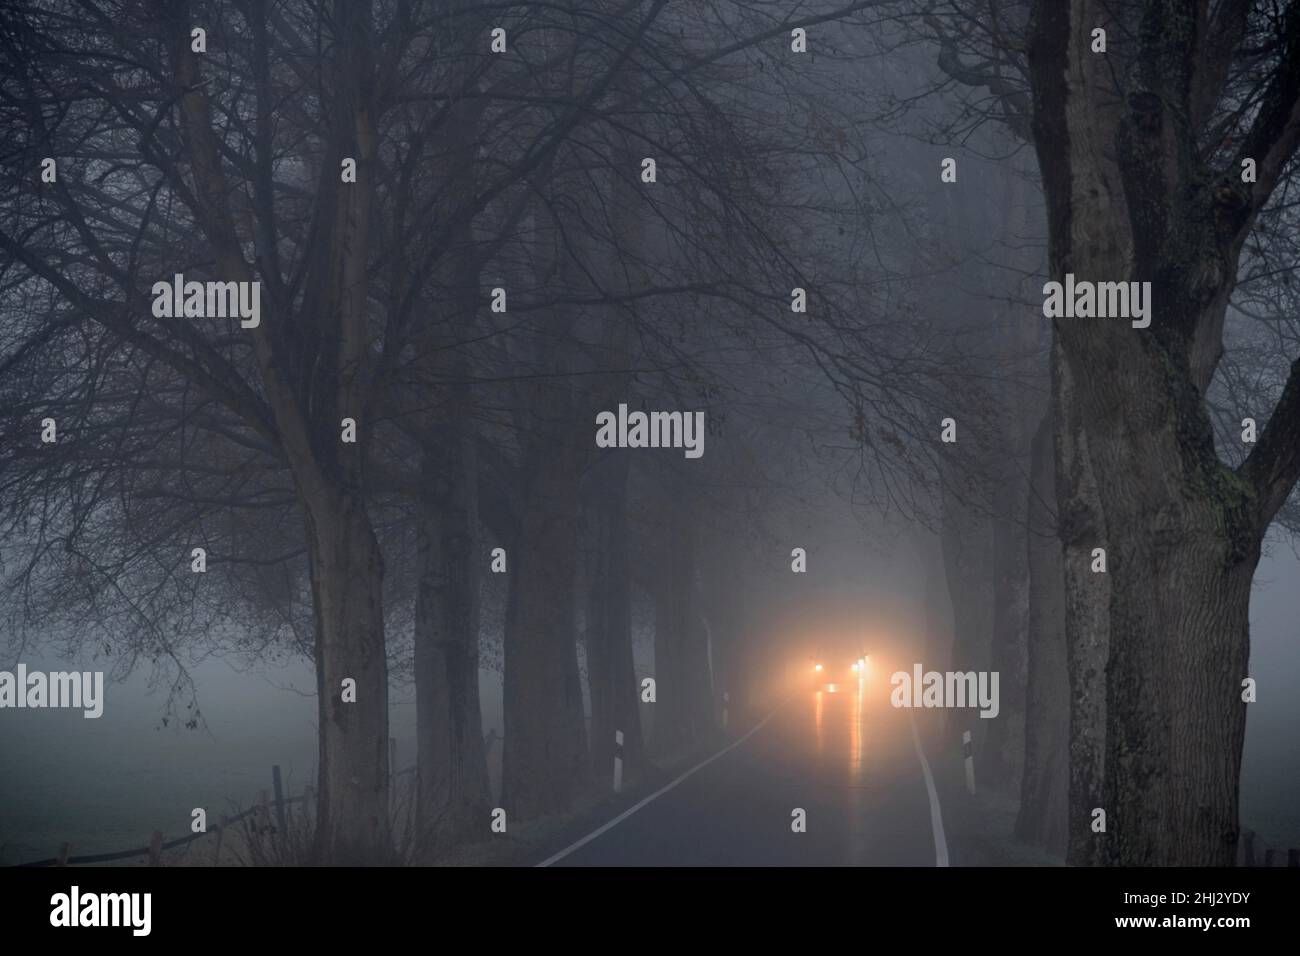 Avenue of trees in early morning fog, cars driving with dipped headlights, North Rhine-Westphalia, Germany Stock Photo